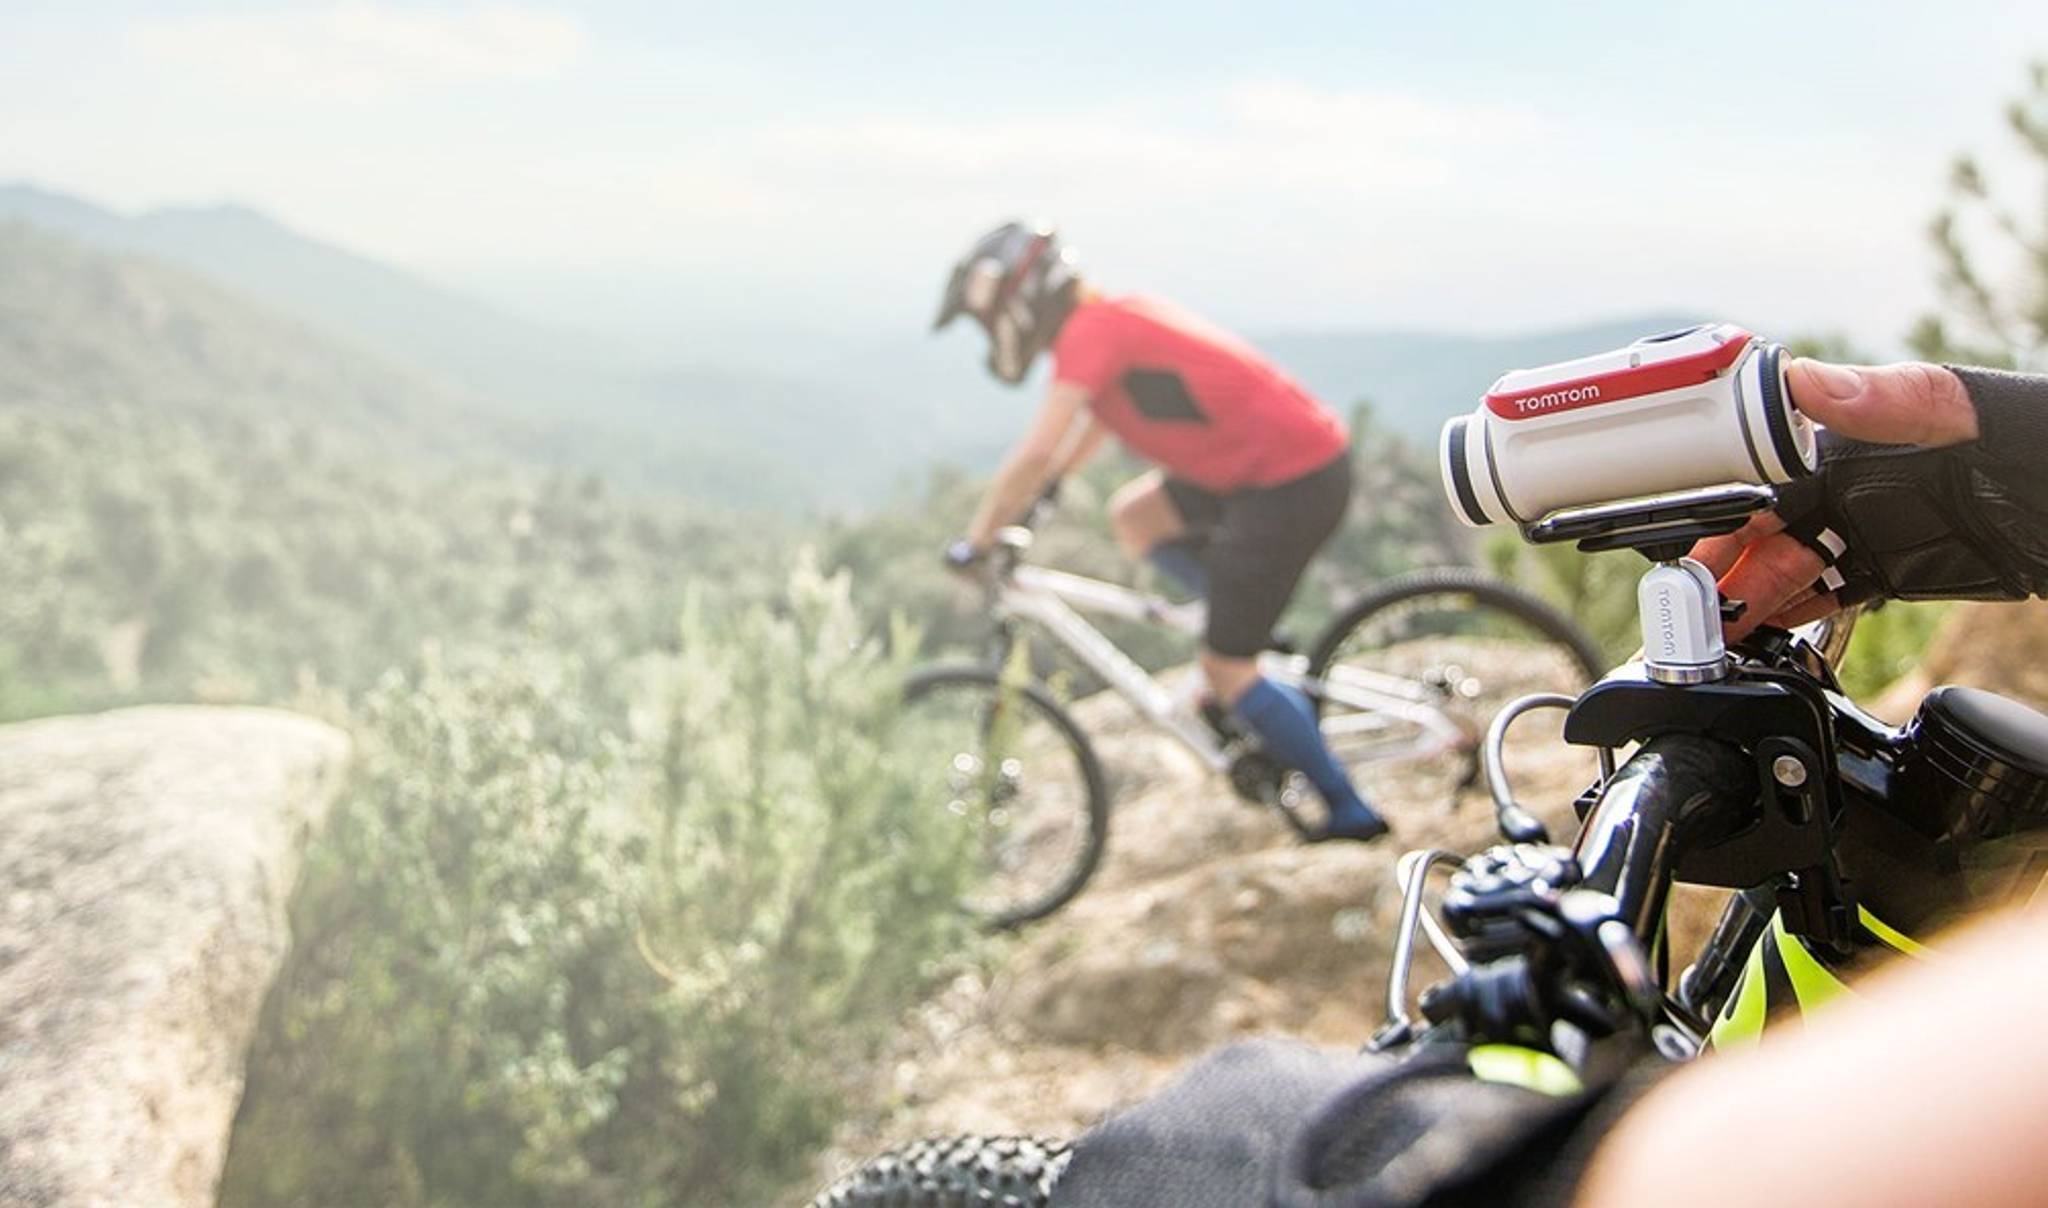 The motion-tracking action cam from TomTom